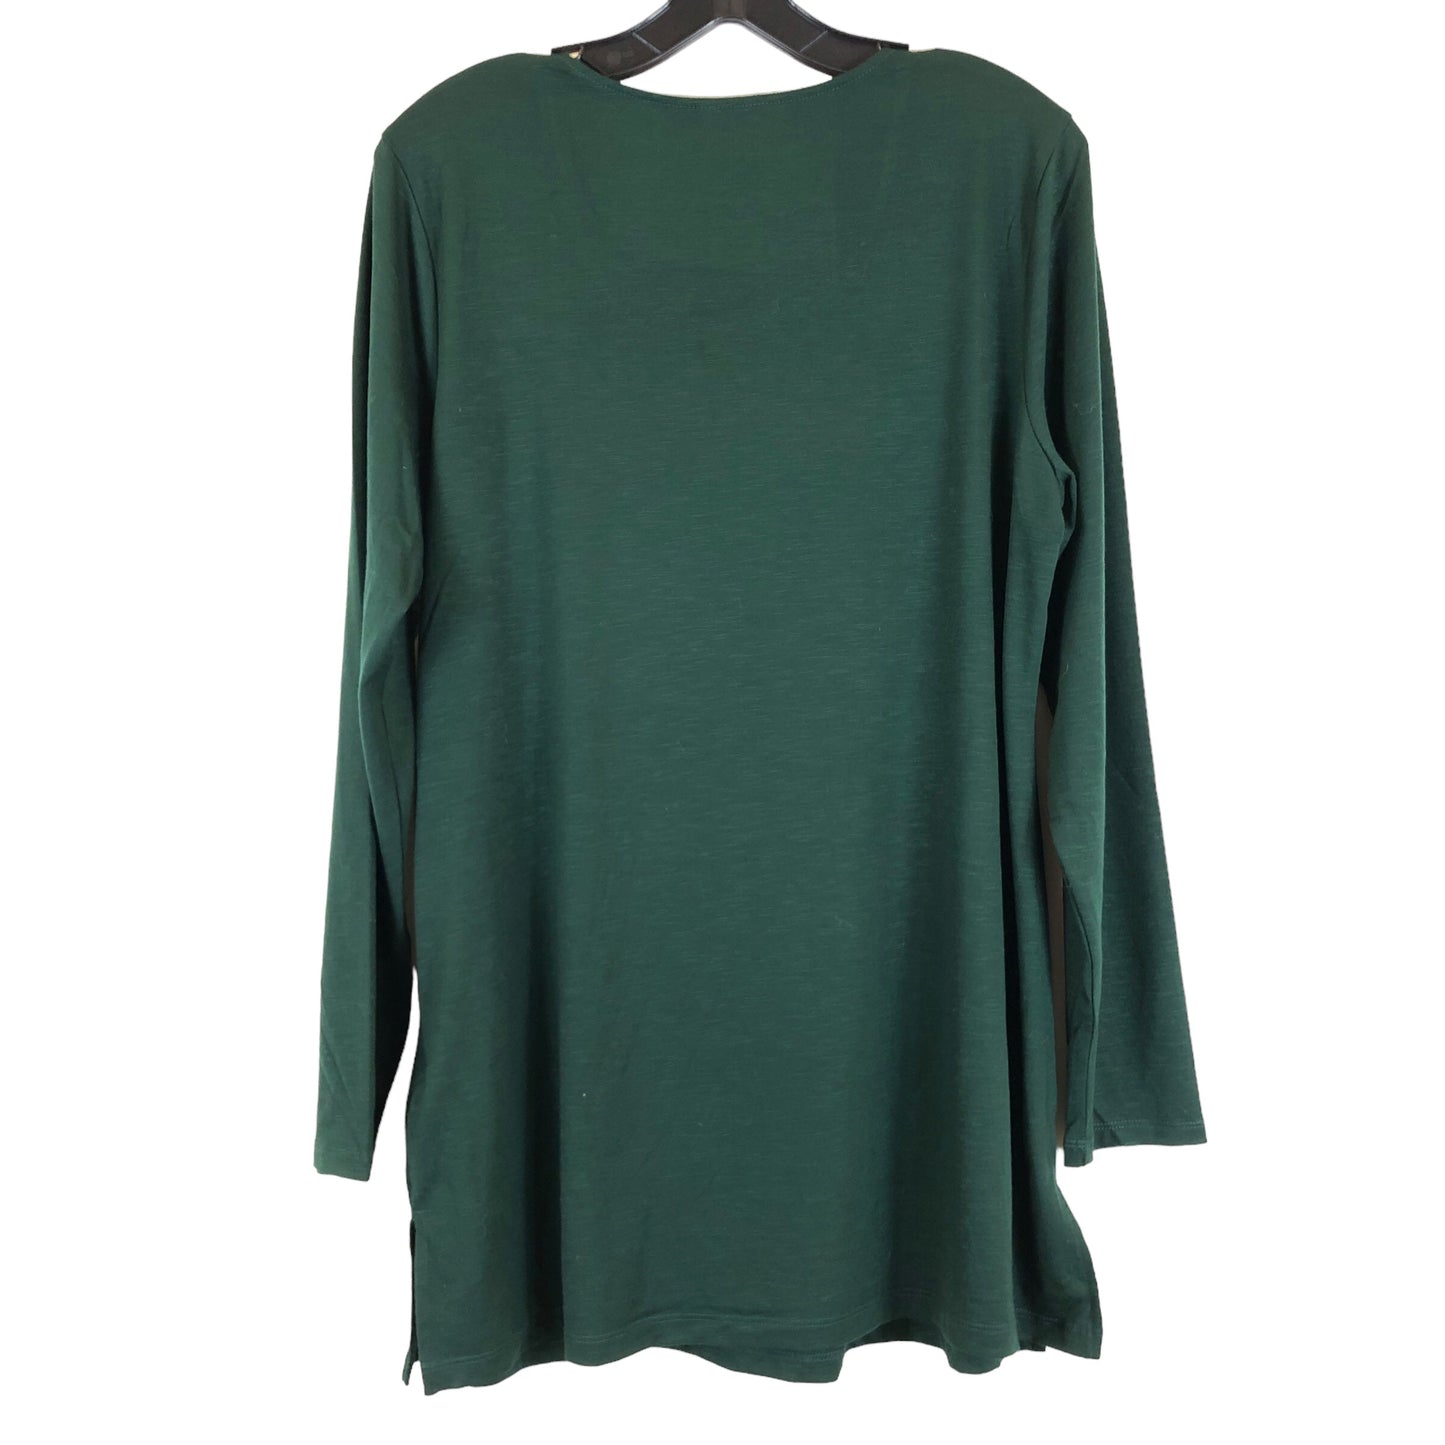 Green Top Long Sleeve Basic Christopher And Banks, Size Petite L